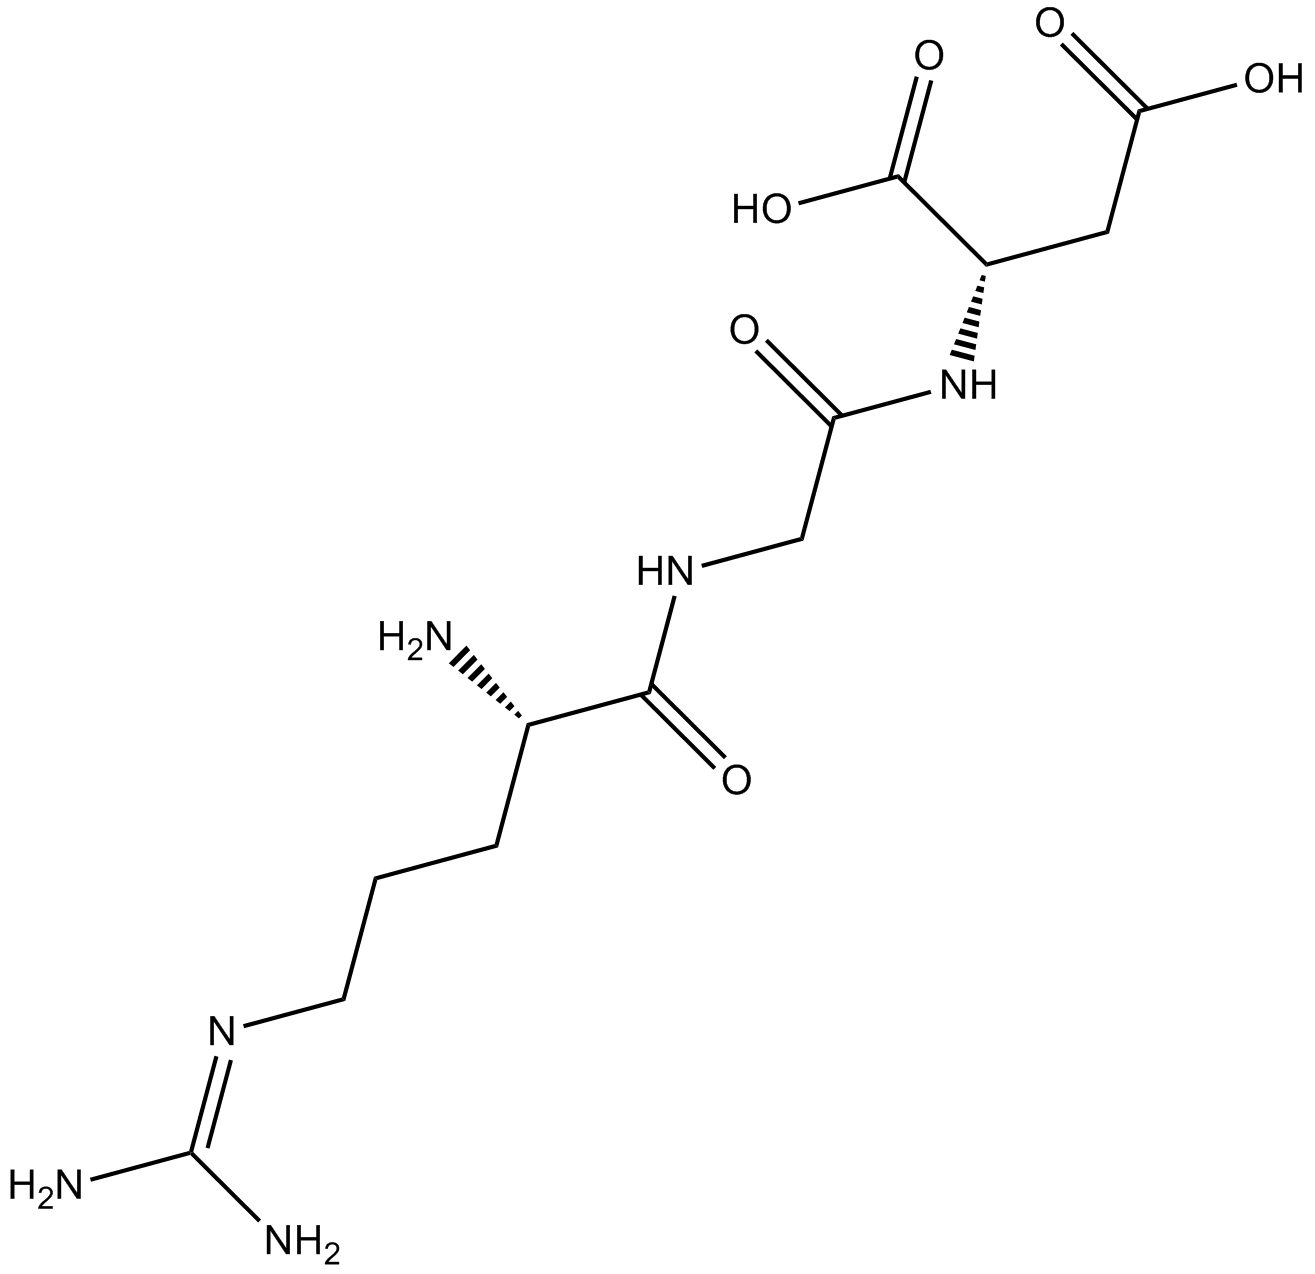 RGD (Arg-Gly-Asp) Peptides  Chemical Structure